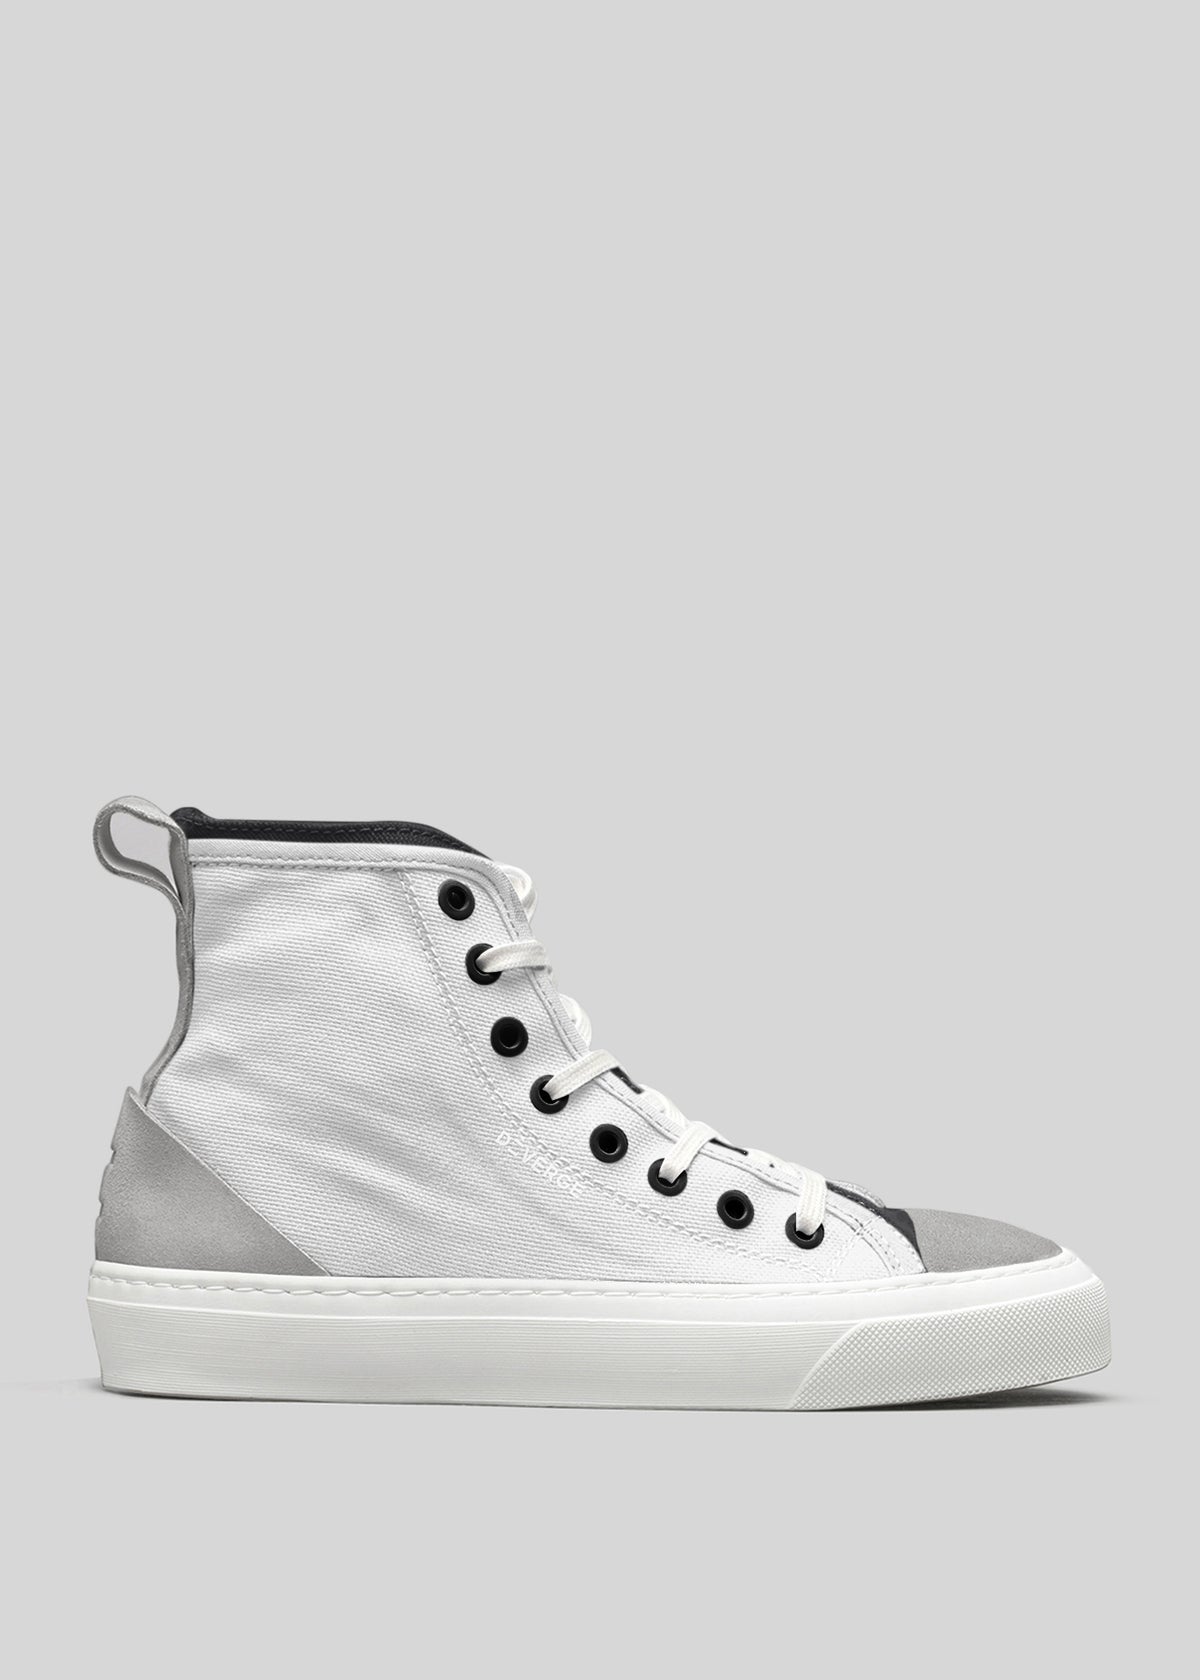 A TH0011 by Joana in white with black laces and a rubber sole, displayed against a gray background.